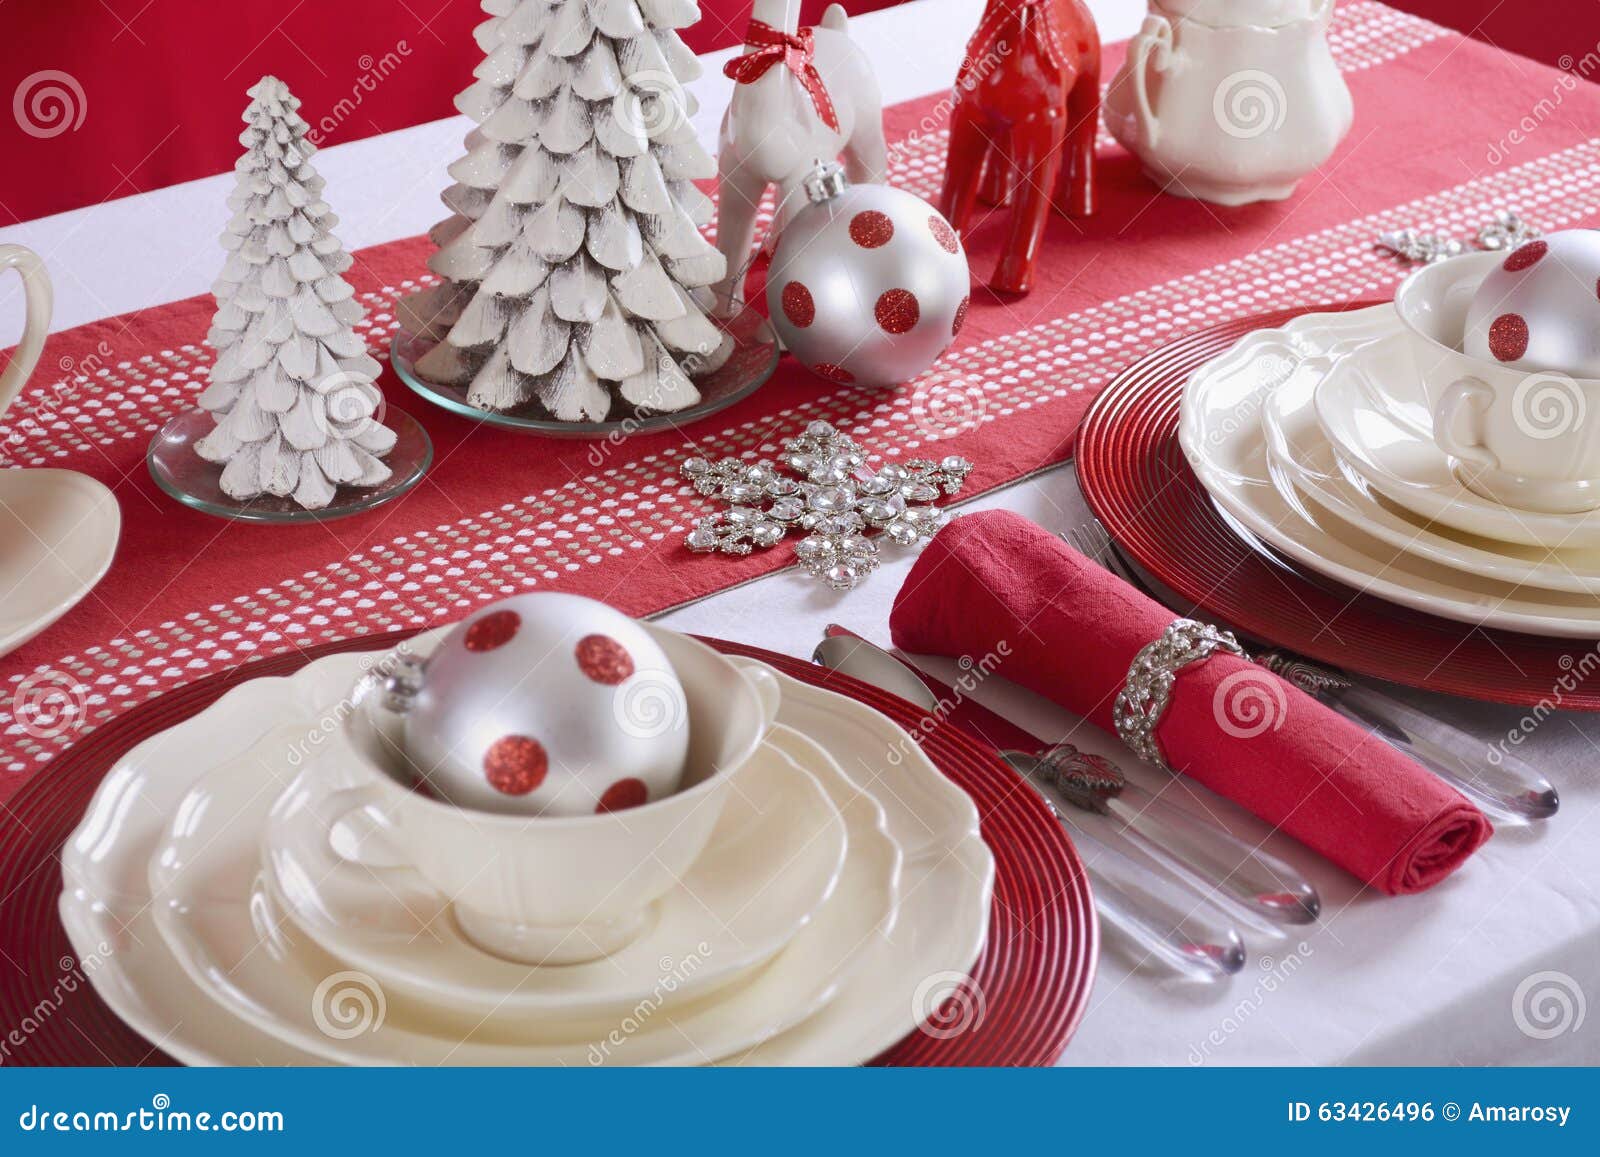 5 Idea Red White And Silver Christmas Table Decorations  mohammadayazkhan